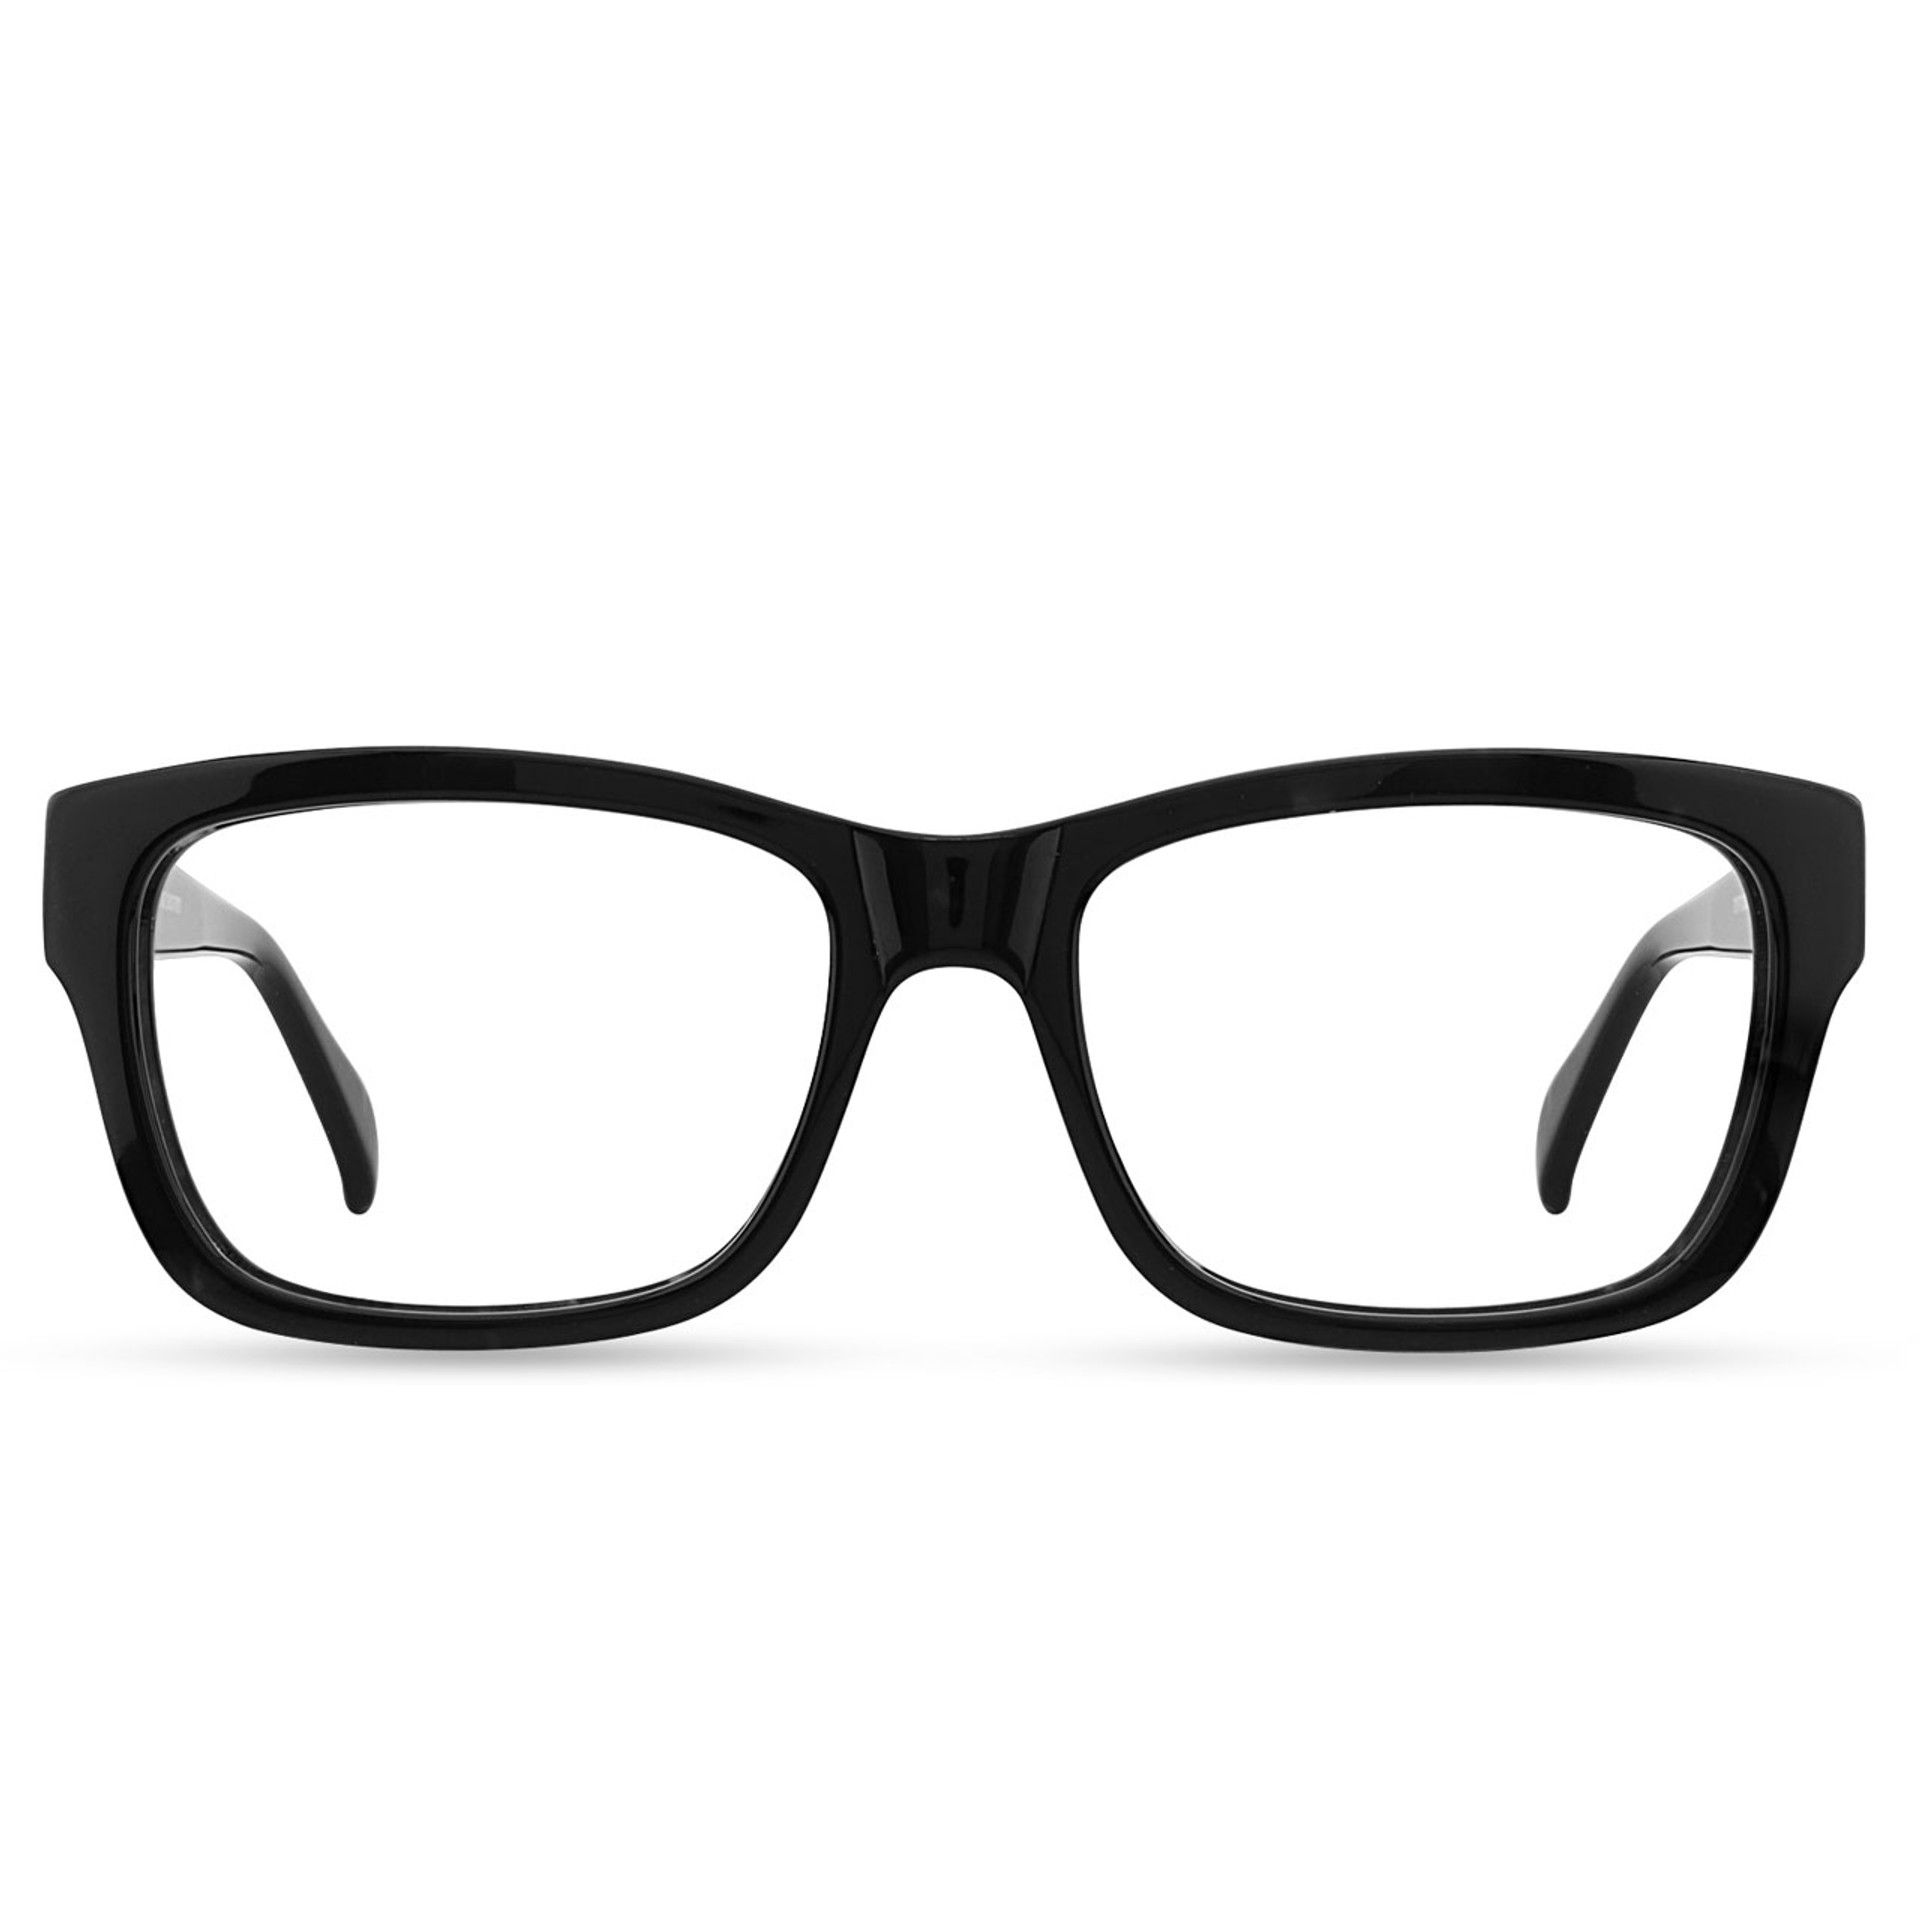 Affordable + Stylish Rx Eyeglasses and Sunglasses | style Galaxy | Geek ...